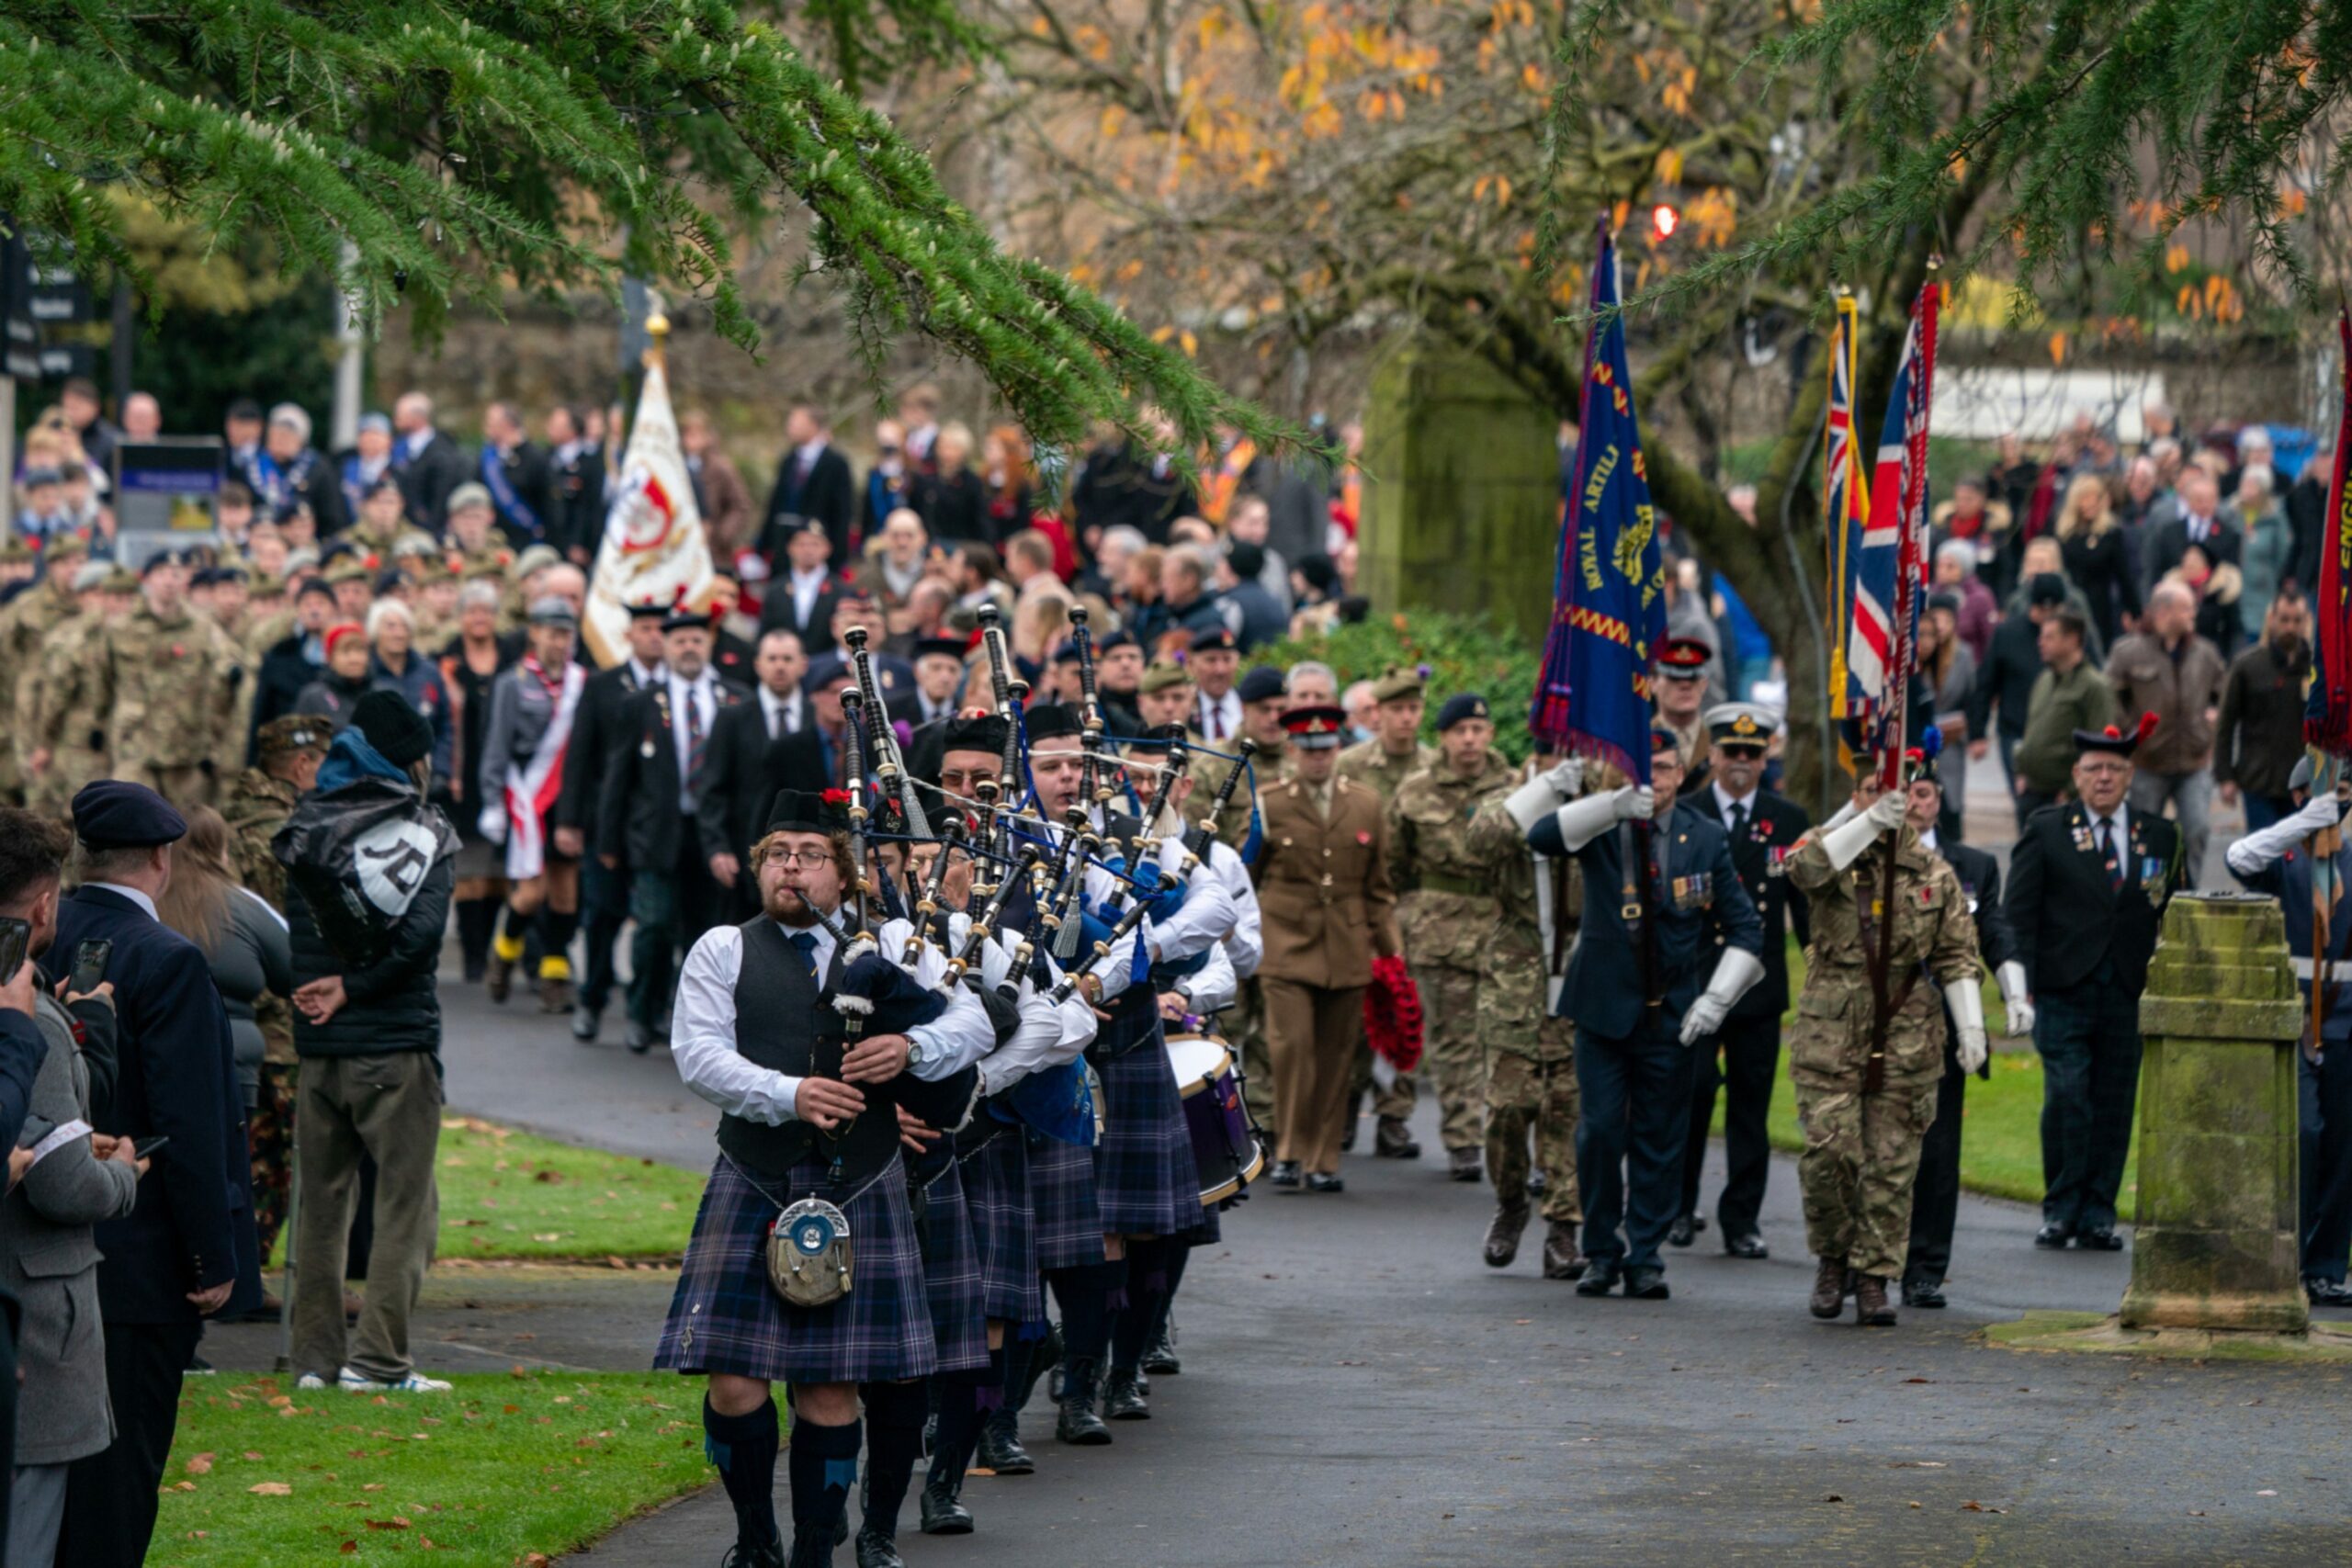 Kirkcaldy, Fife, remembrance day event in 2021